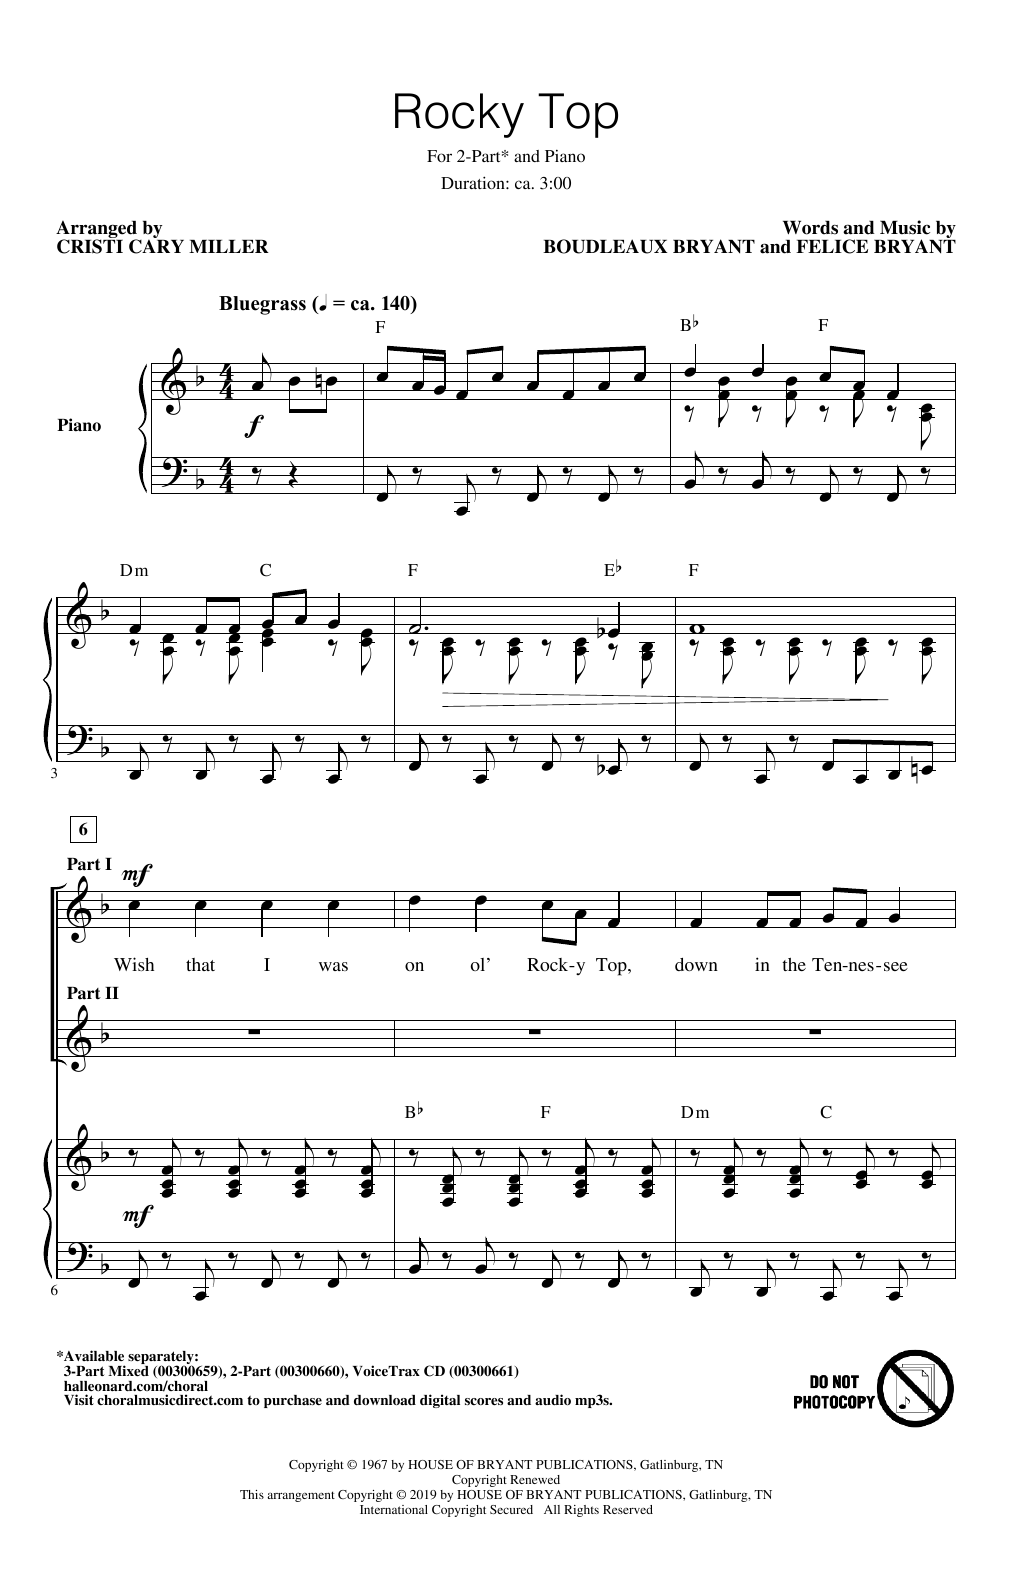 Download Boudleaux Bryant and Felice Bryant Rocky Top (arr. Cristi Cary Miller) Sheet Music